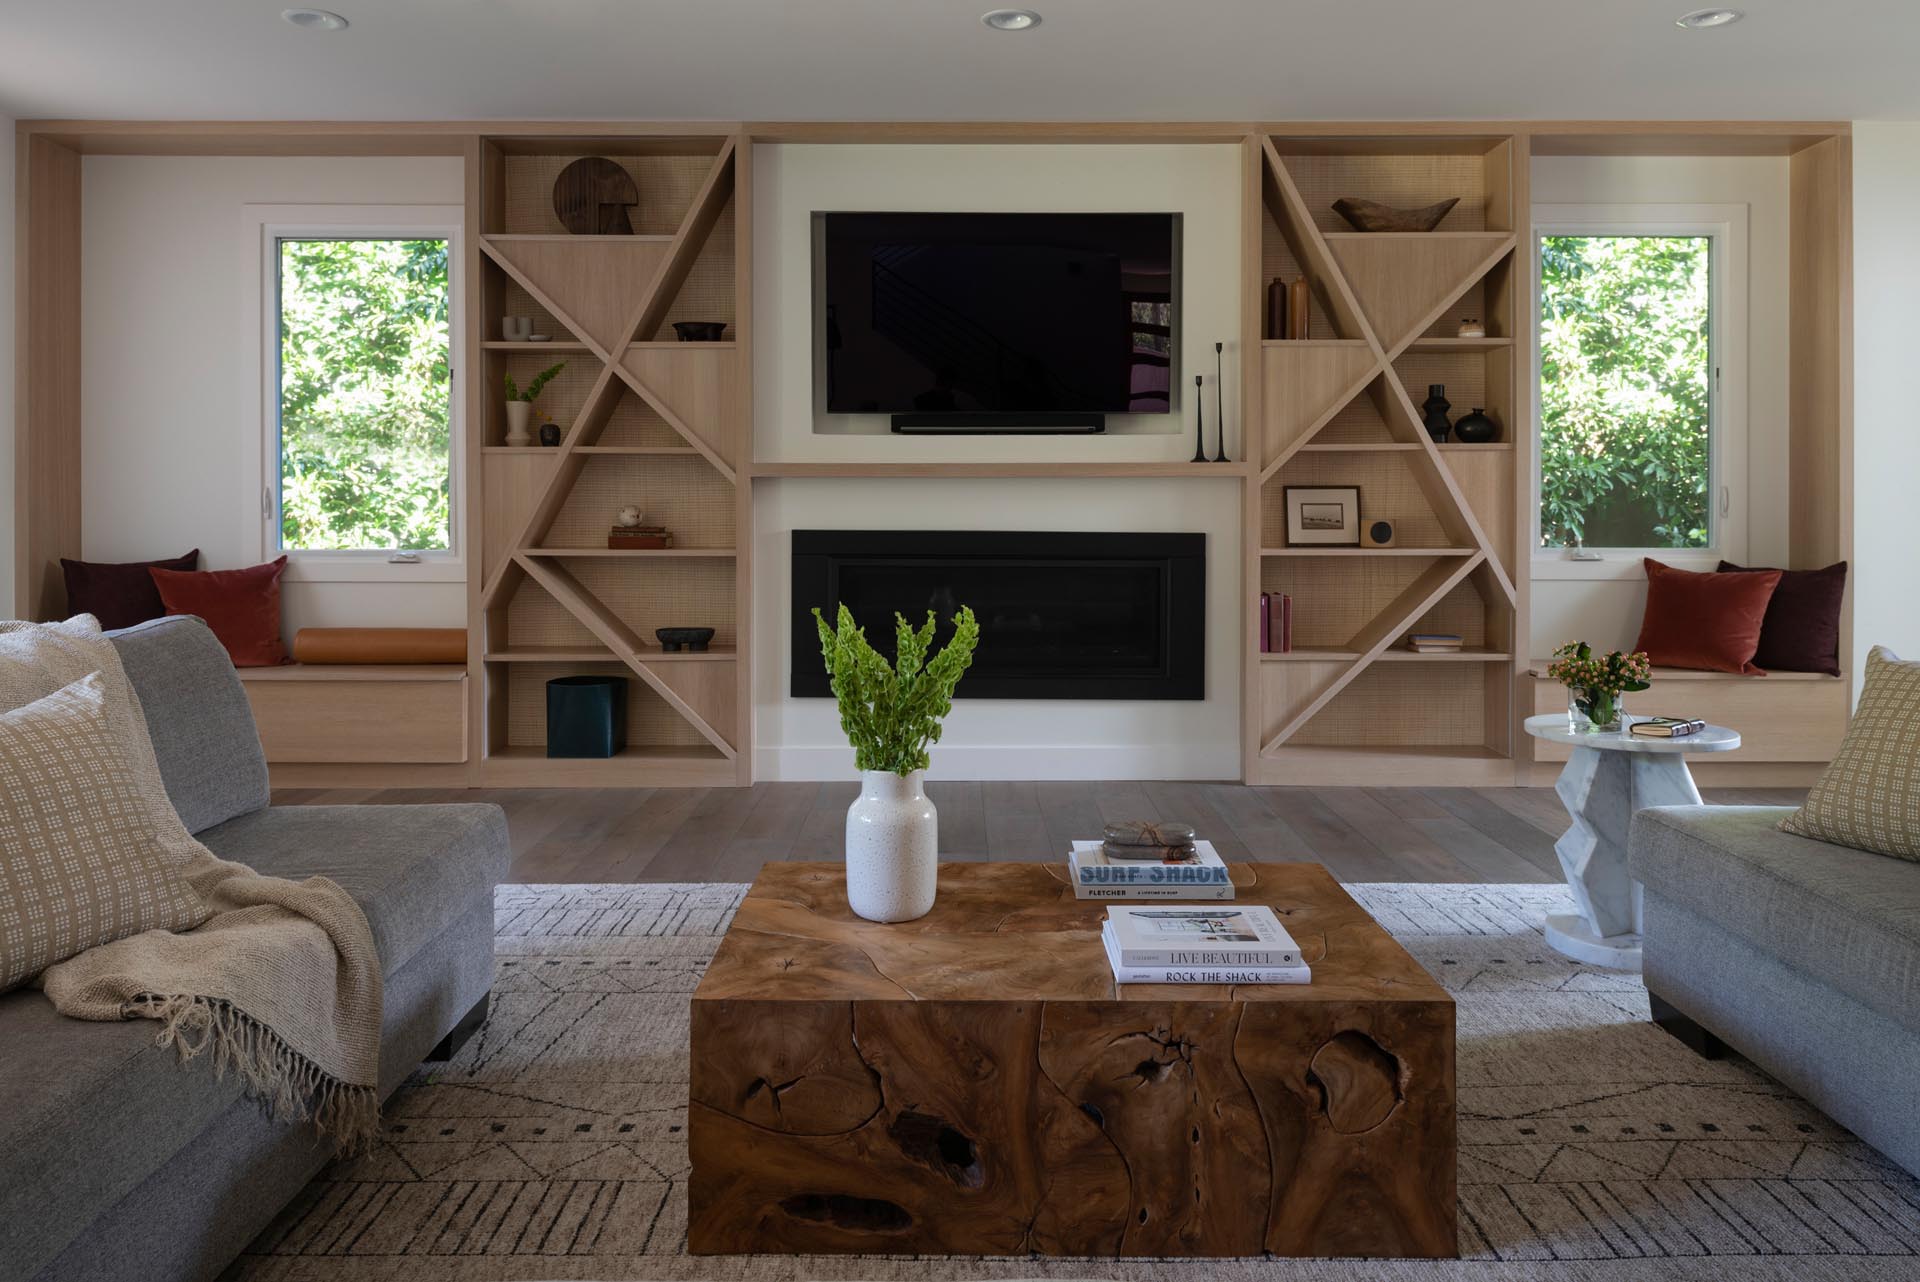 Creative Shelving Shapes Were Designed, Wall To Entertainment Center Bookcase And Fireplace Design